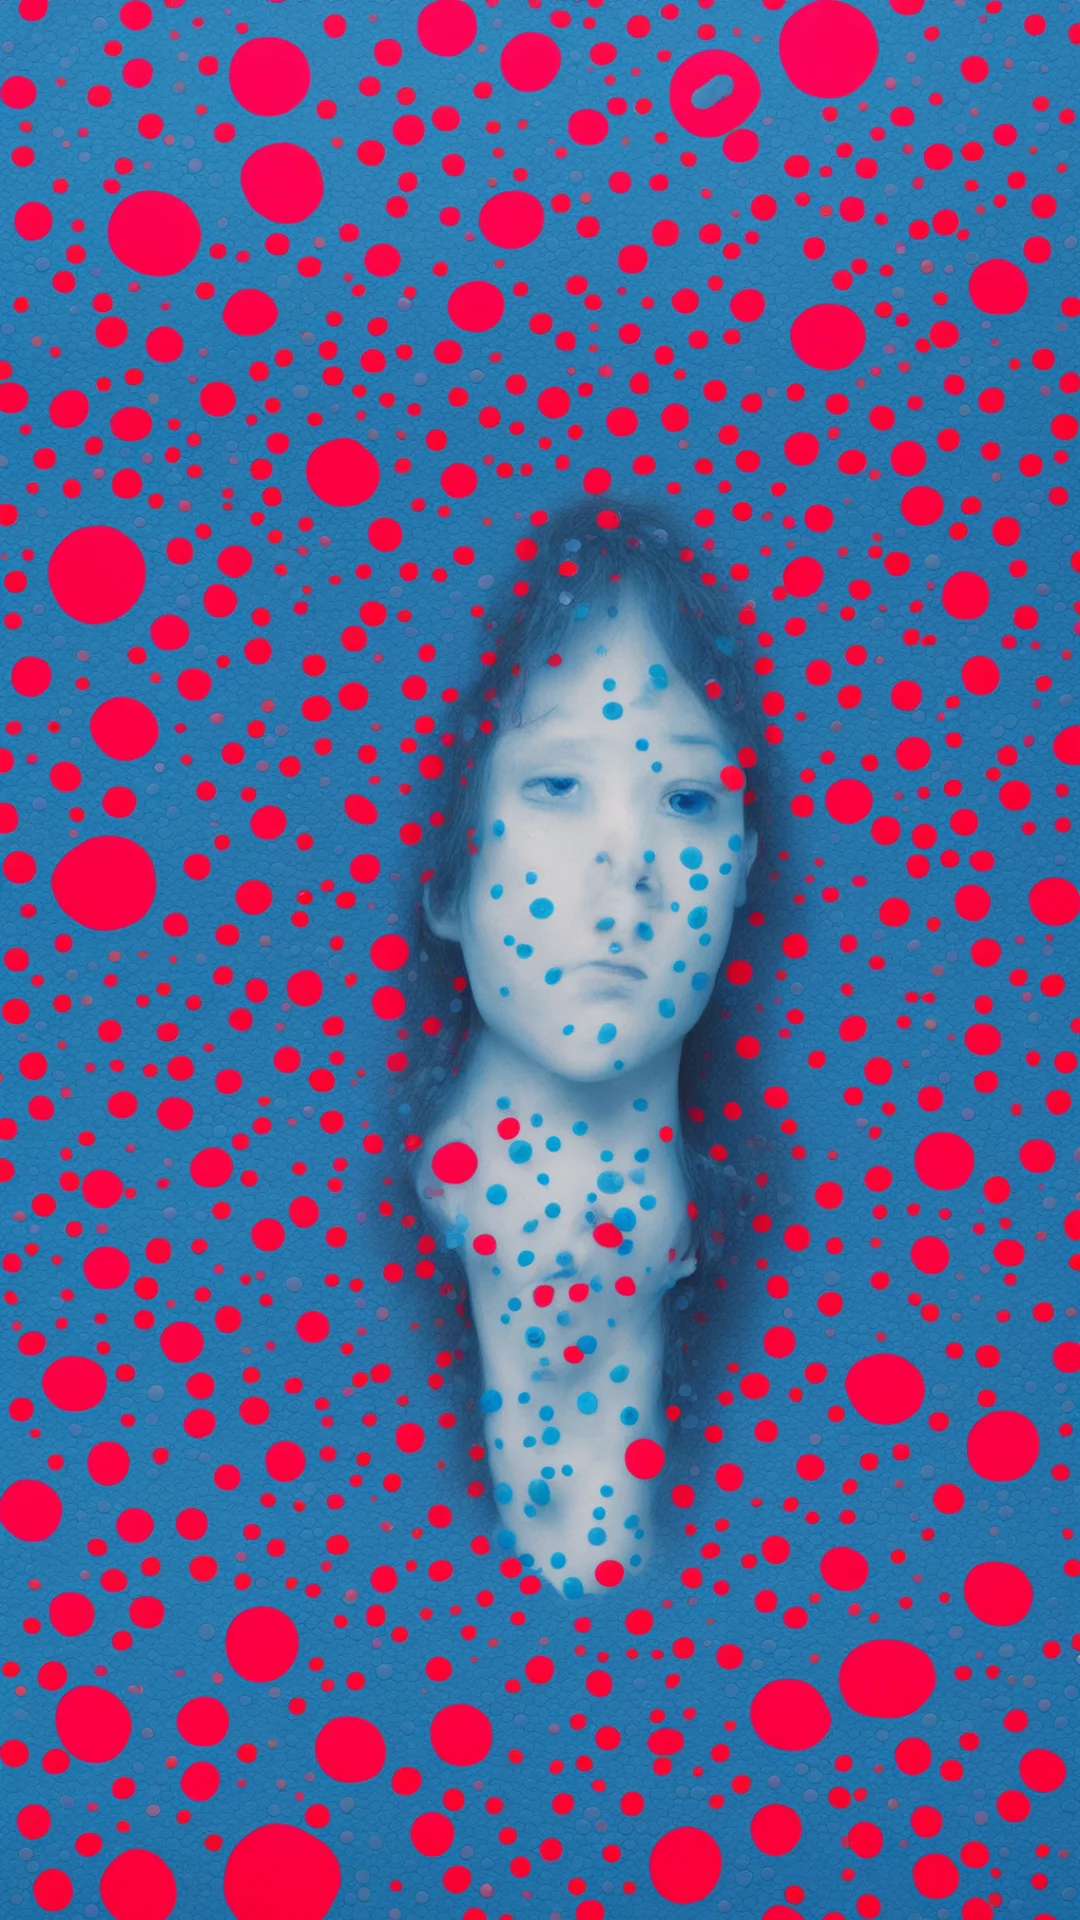 aiangst and distress in blue tones yayoi kusama style tall